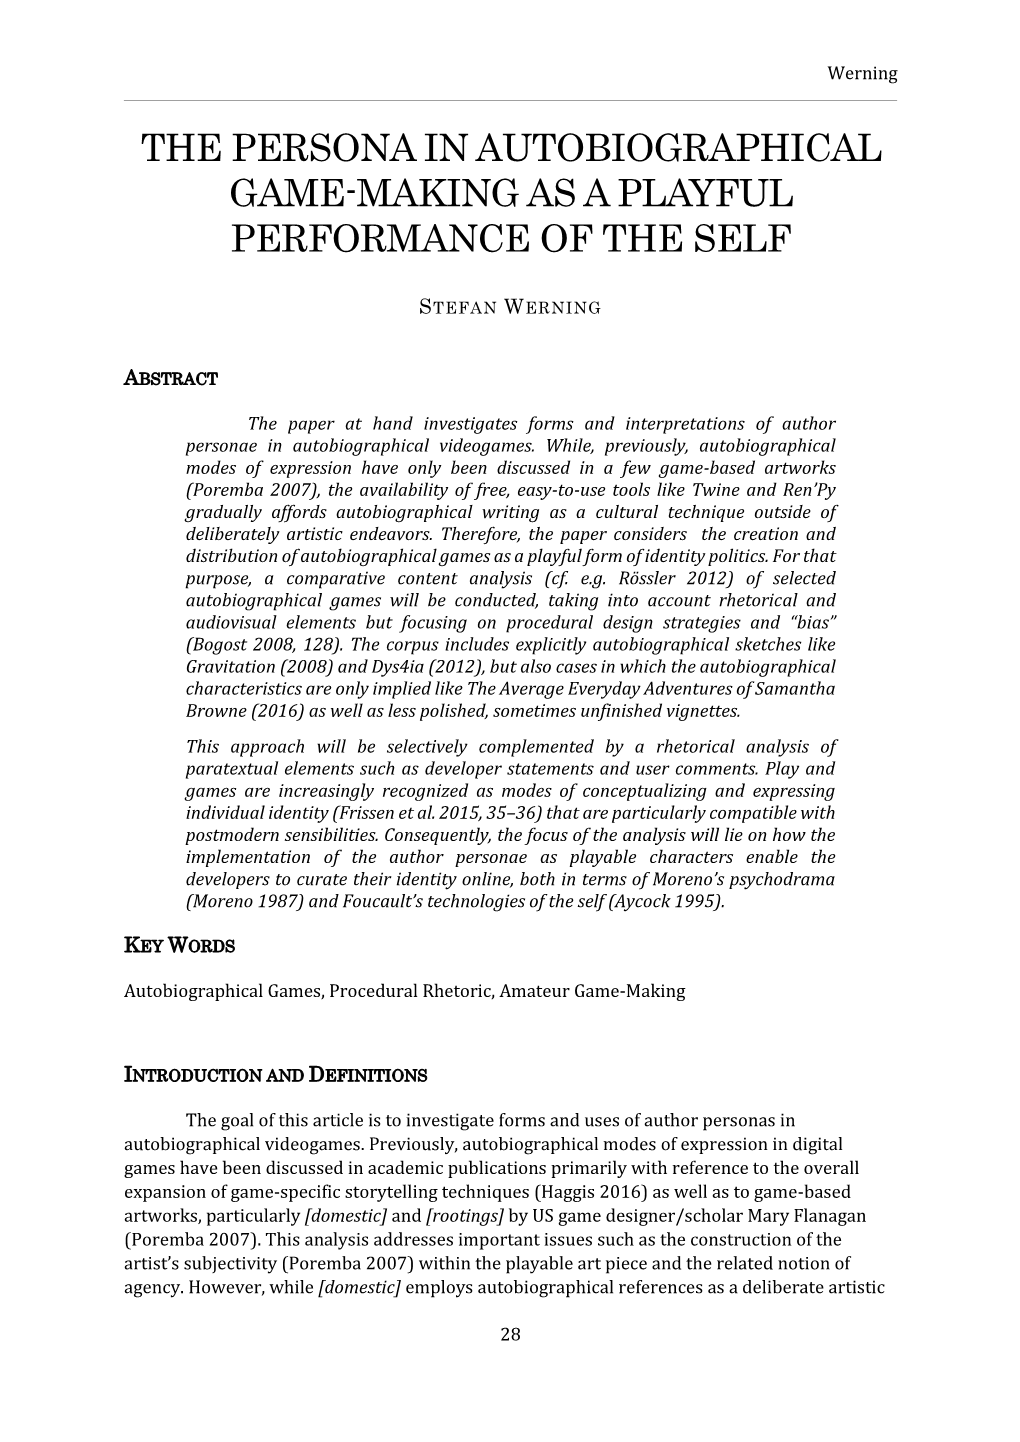 The Persona in Autobiographical Game-Making As a Playful Performance of the Self